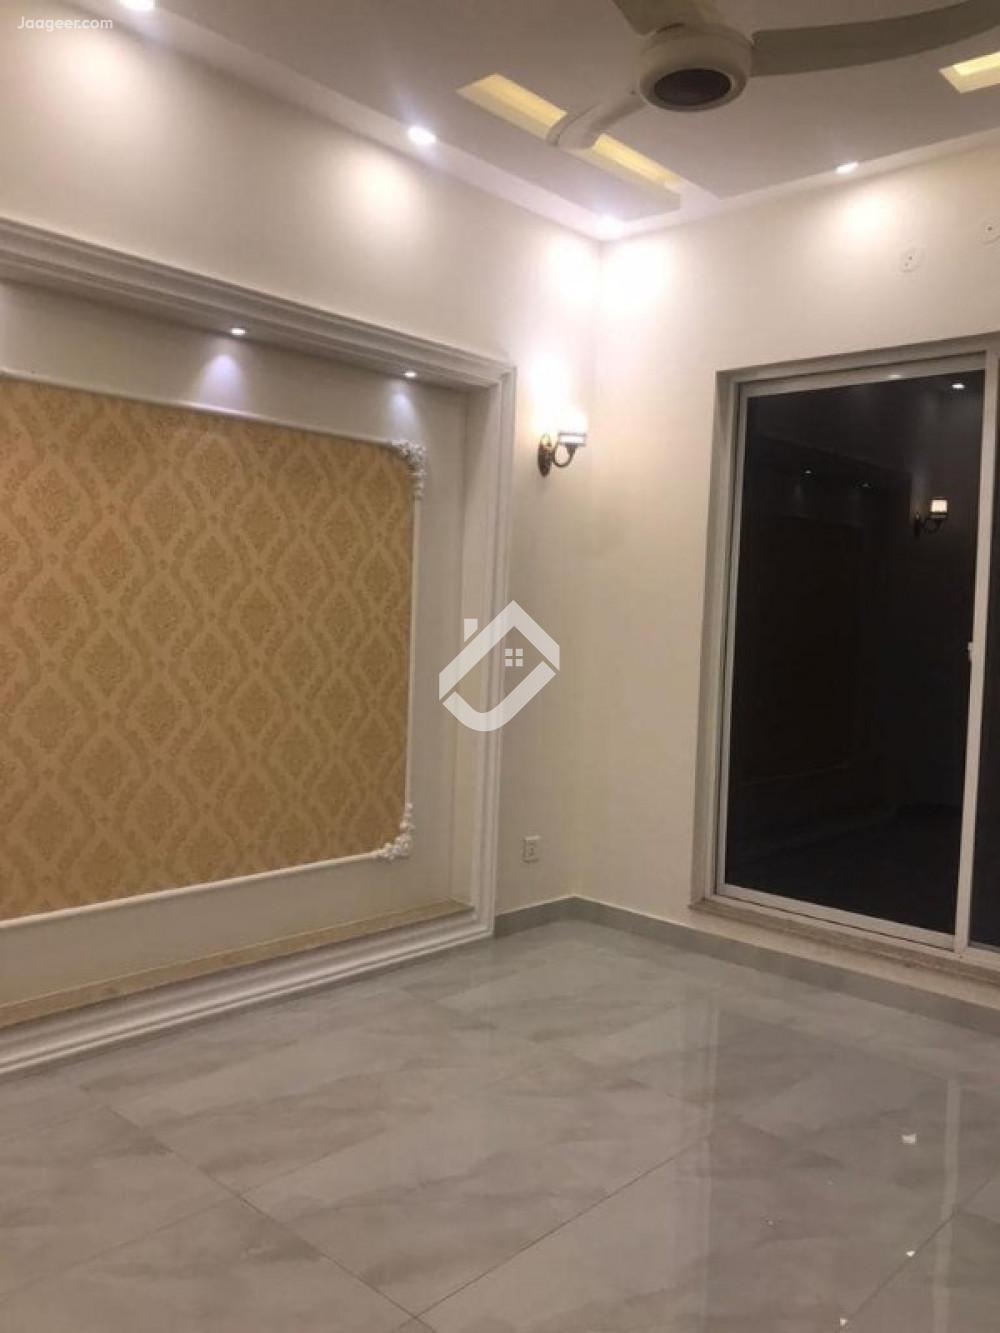 Main image 5 Marla Upper Portion House For Rent In Paragon City  ---